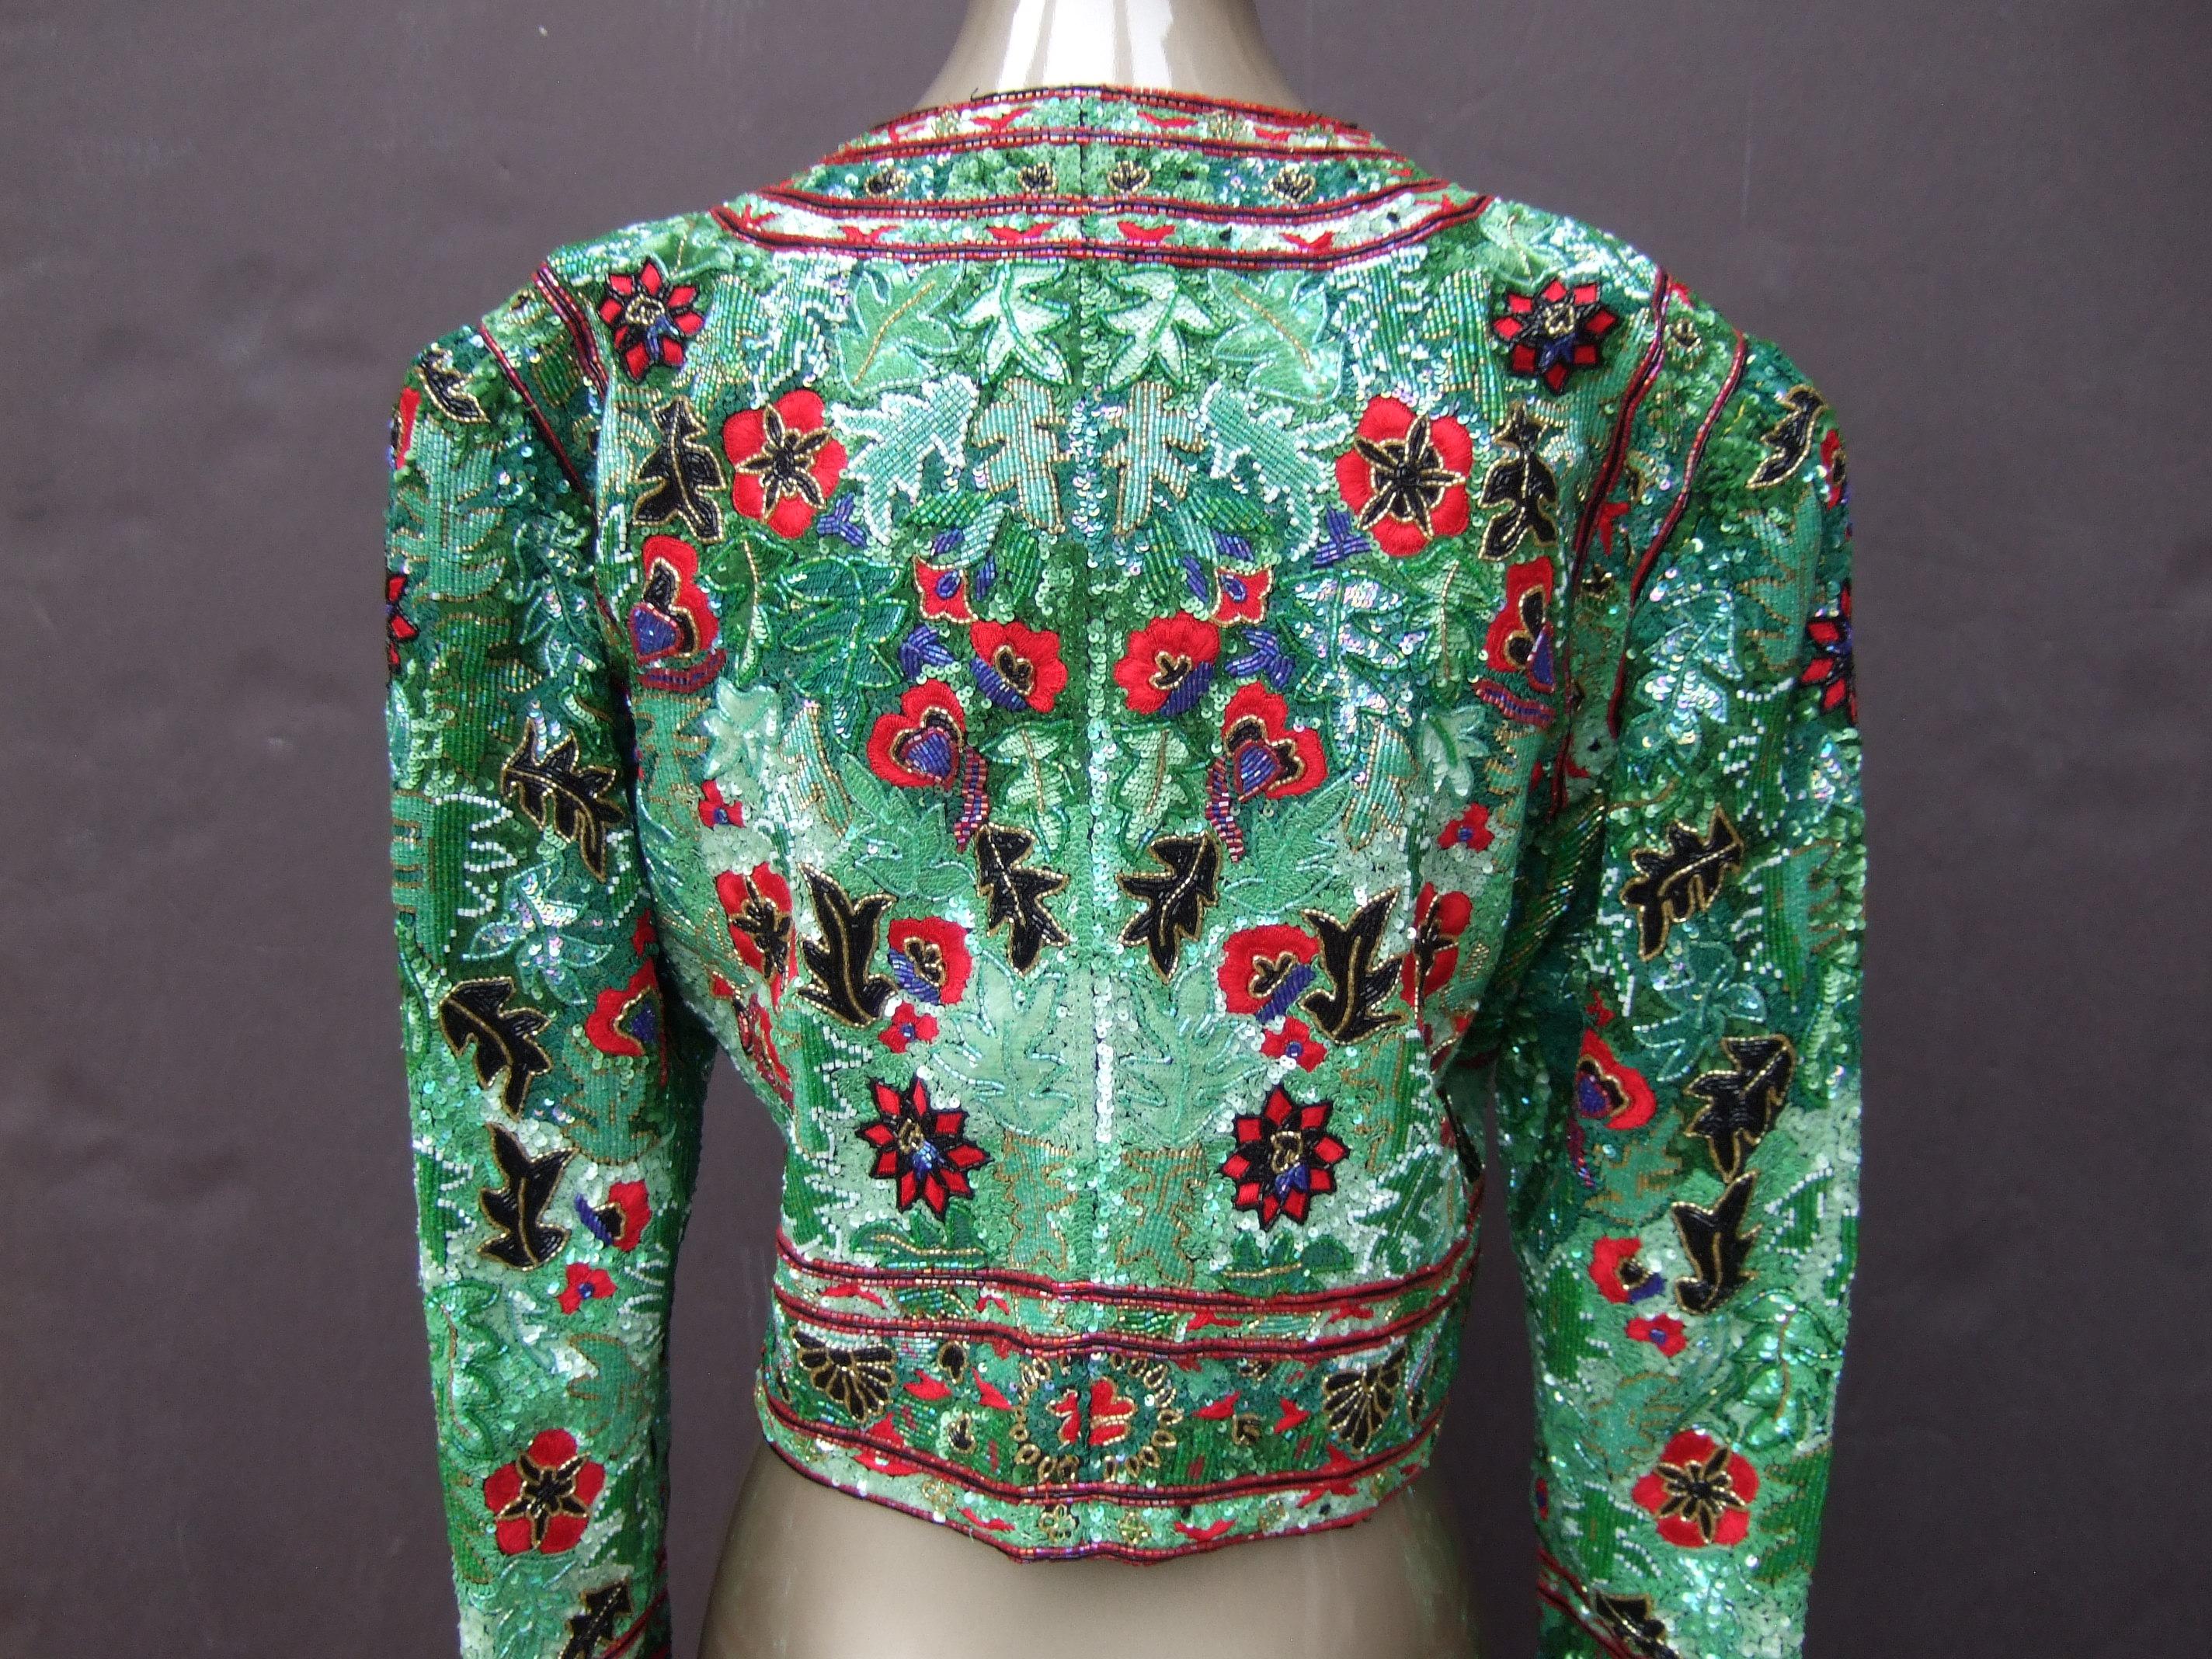 Exquisite Elaborate Glass Floral Beaded Embroidered Bolero Jacket c 1980s For Sale 14